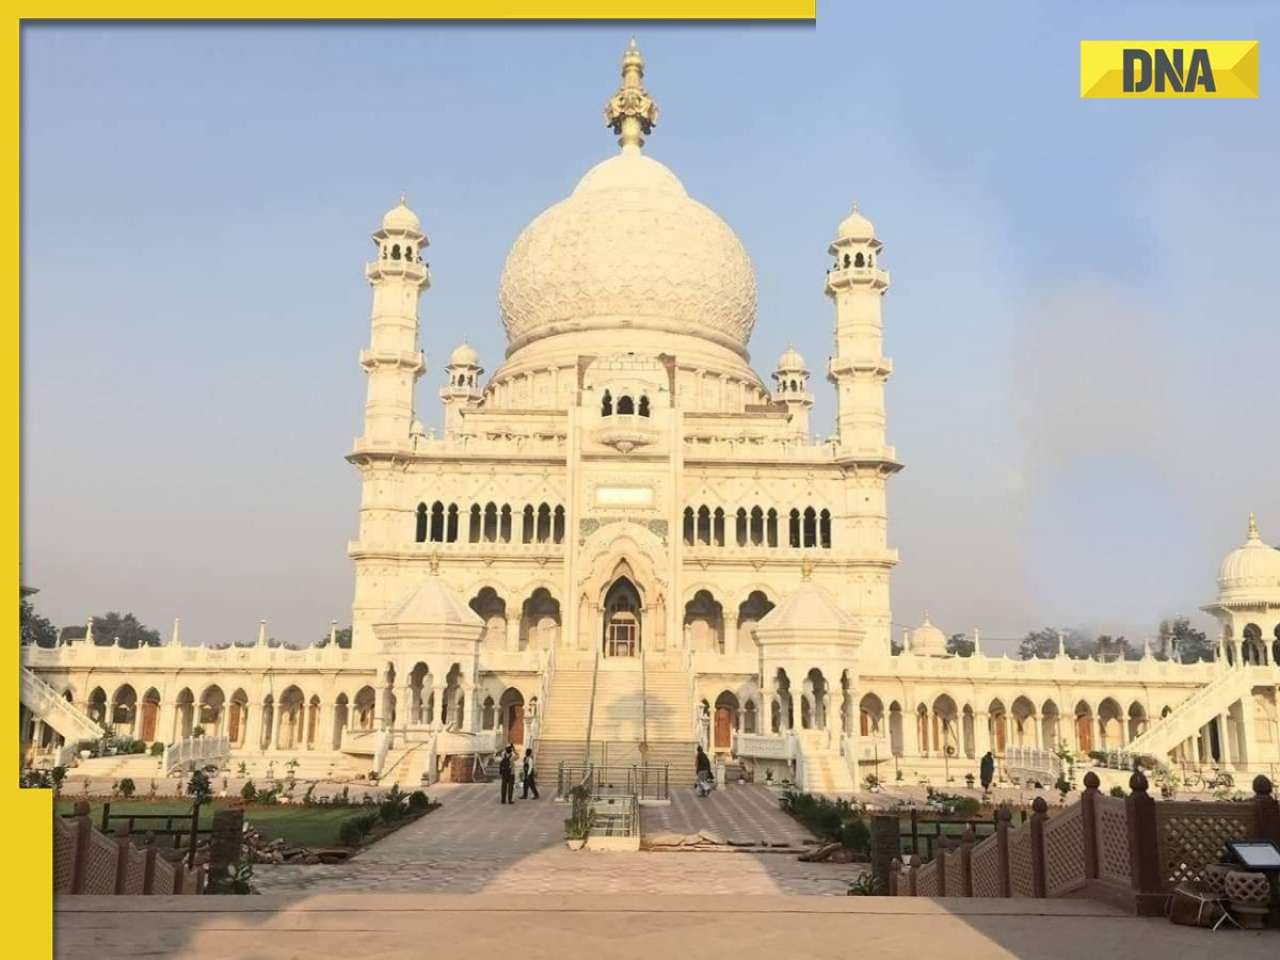 This white marble structure in Agra, competing with Taj Mahal, took 104 years to complete